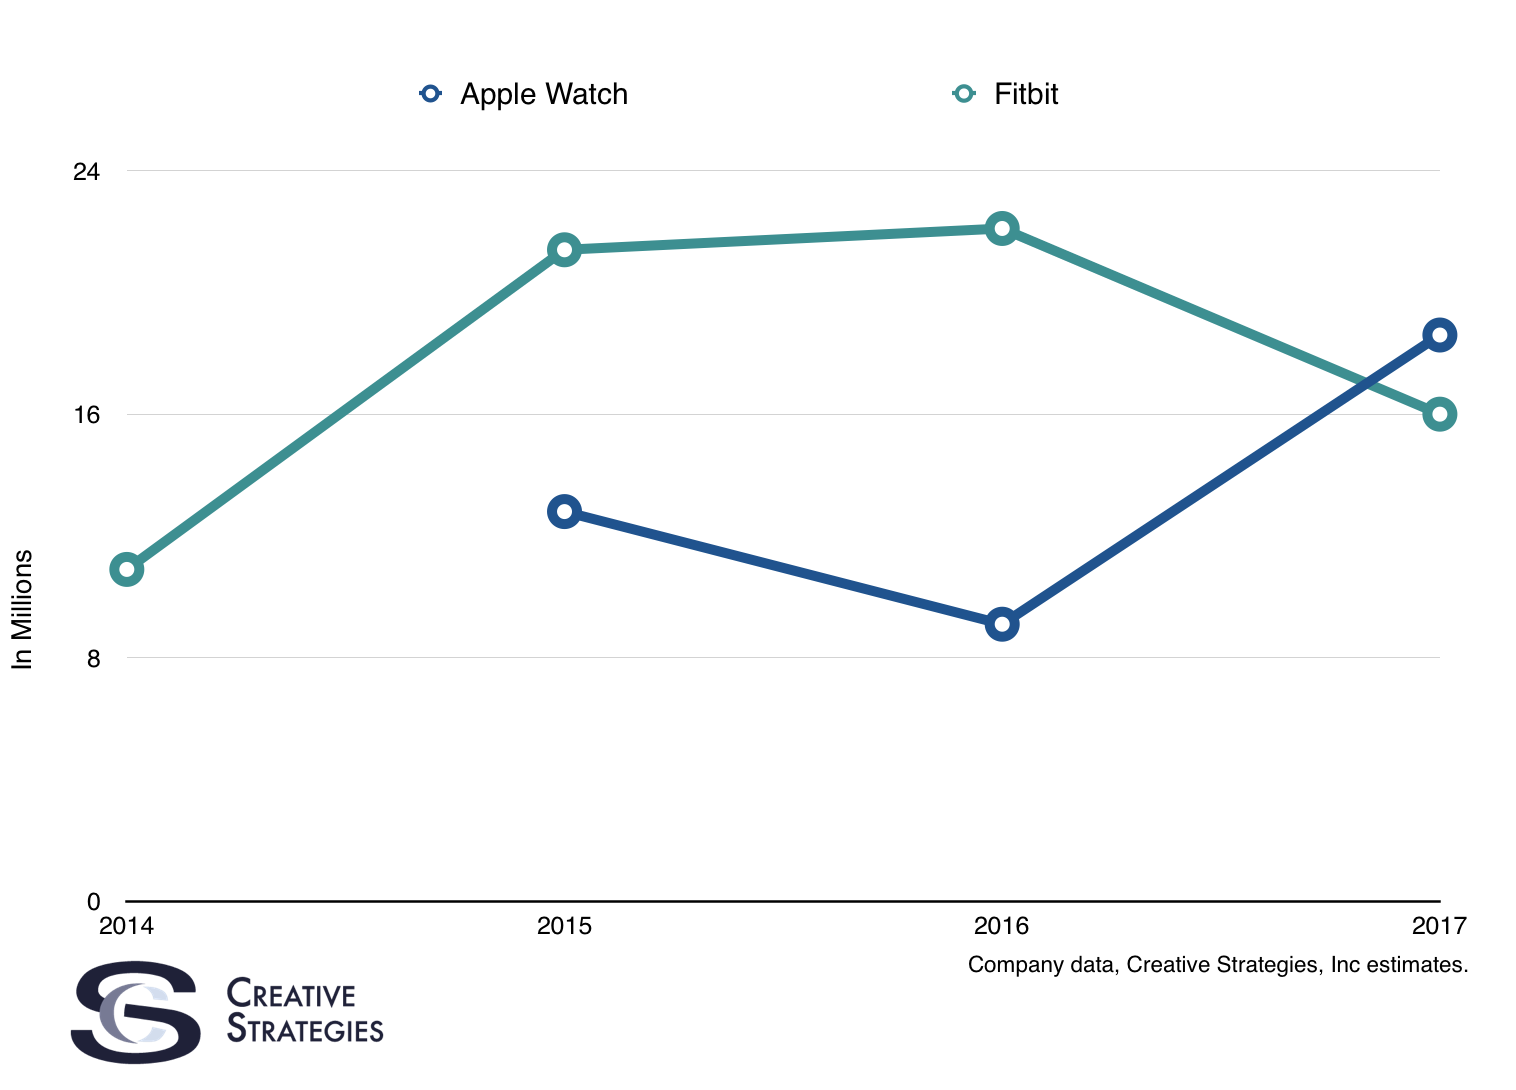 Apple Watch’s Big Quarter and a Series of Firsts